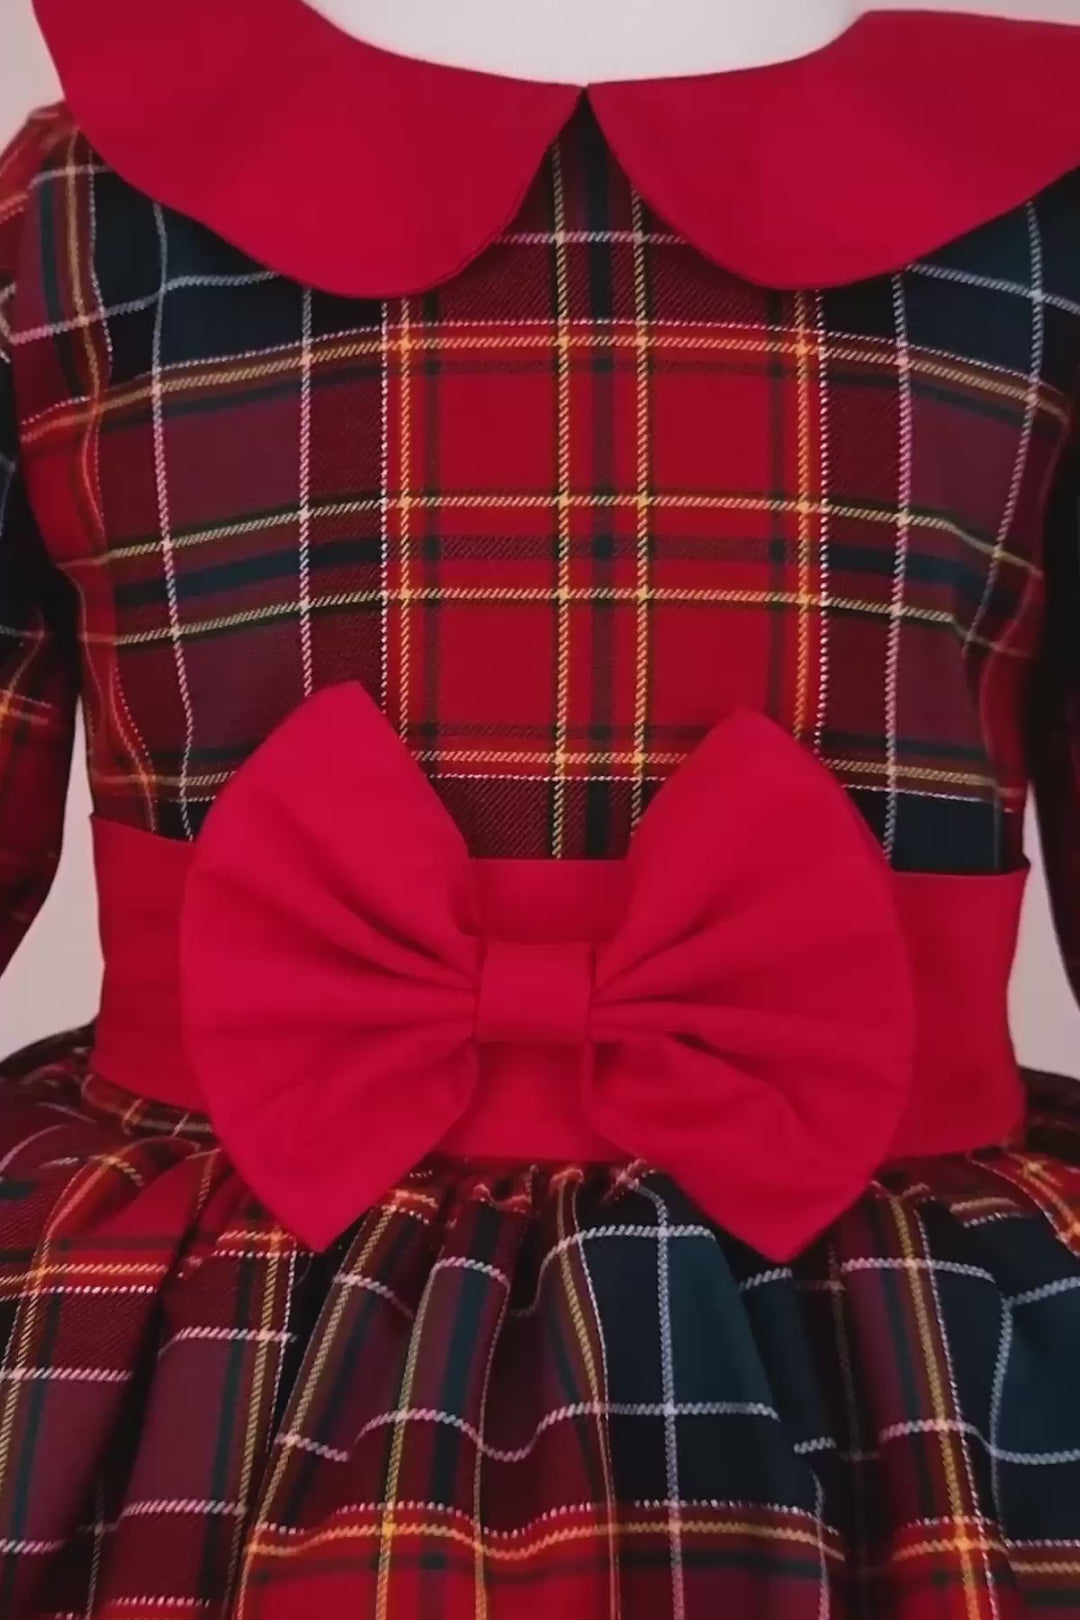 360° view of a red plaid Christmas dress that has long sleeves, baby collar, bow, belt, and knee length skirt